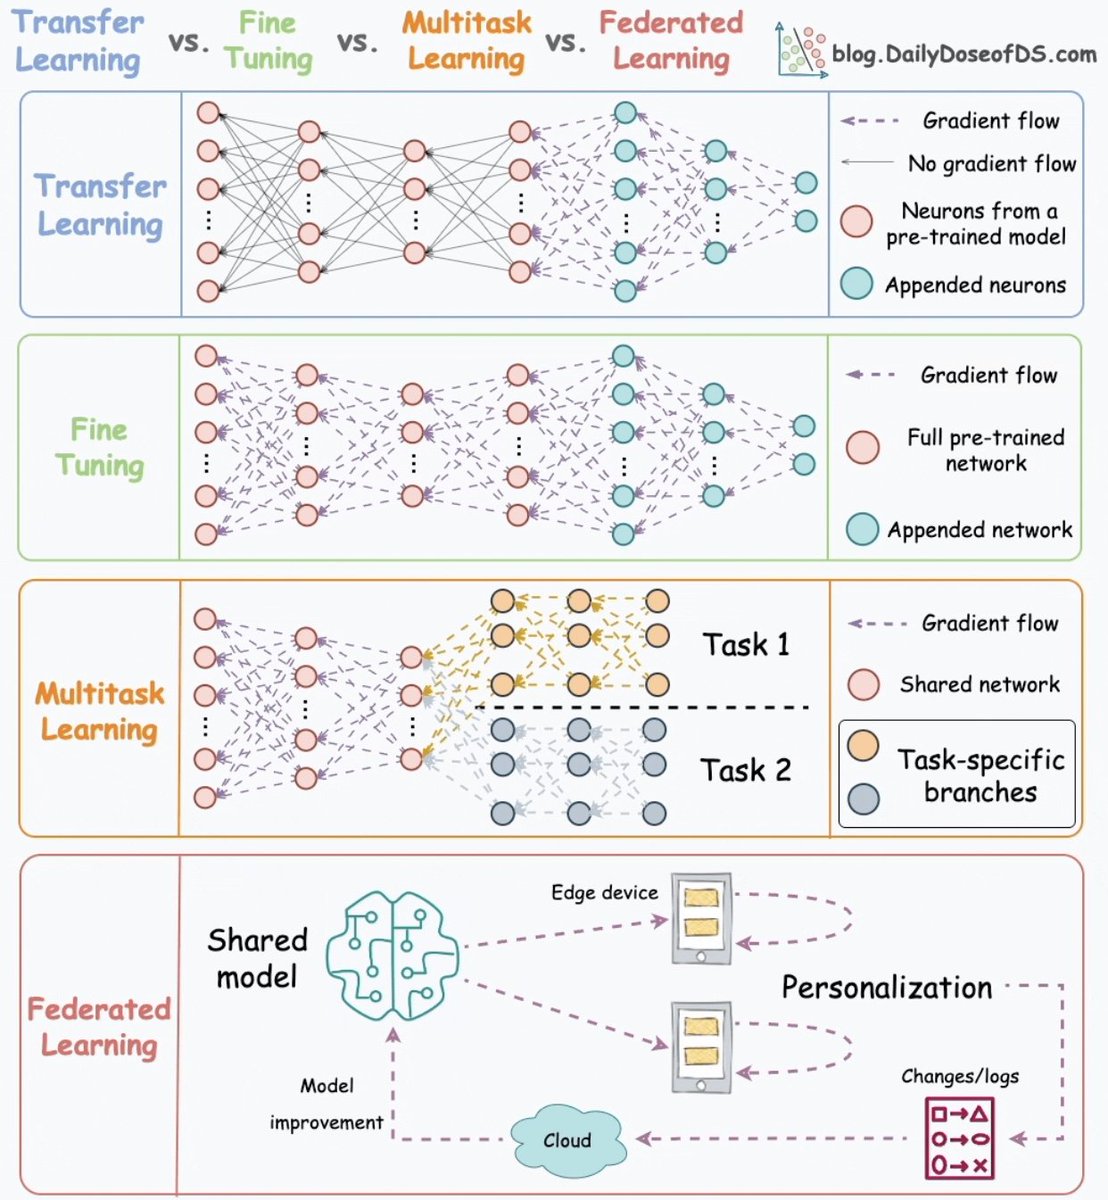 Transfer learning vs fine tuning vs multitask learning vs federated learning! Source: Daily Dose of DS @DataScienceDojo #AI #MachineLearning #DeepLearning #DataScience #GenerativeAI #LLM #Python #Code #100DaysOfCode @CurieuxExplorer @PawlowskiMario @mvollmer1 @gvalan…